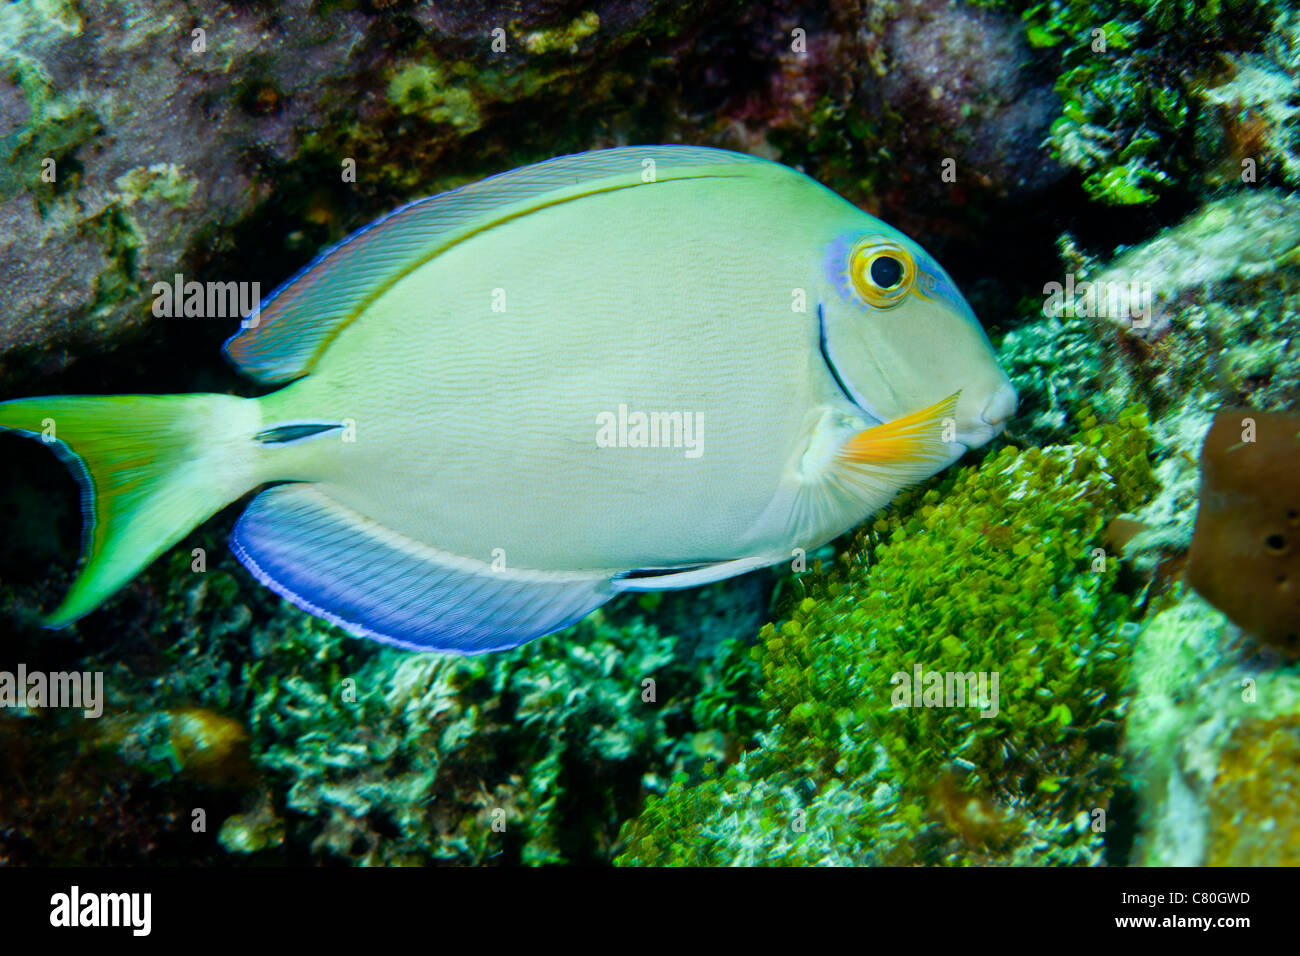 A tang fish eating plant growth off the coast of Key Largo, Florida. Stock Photo